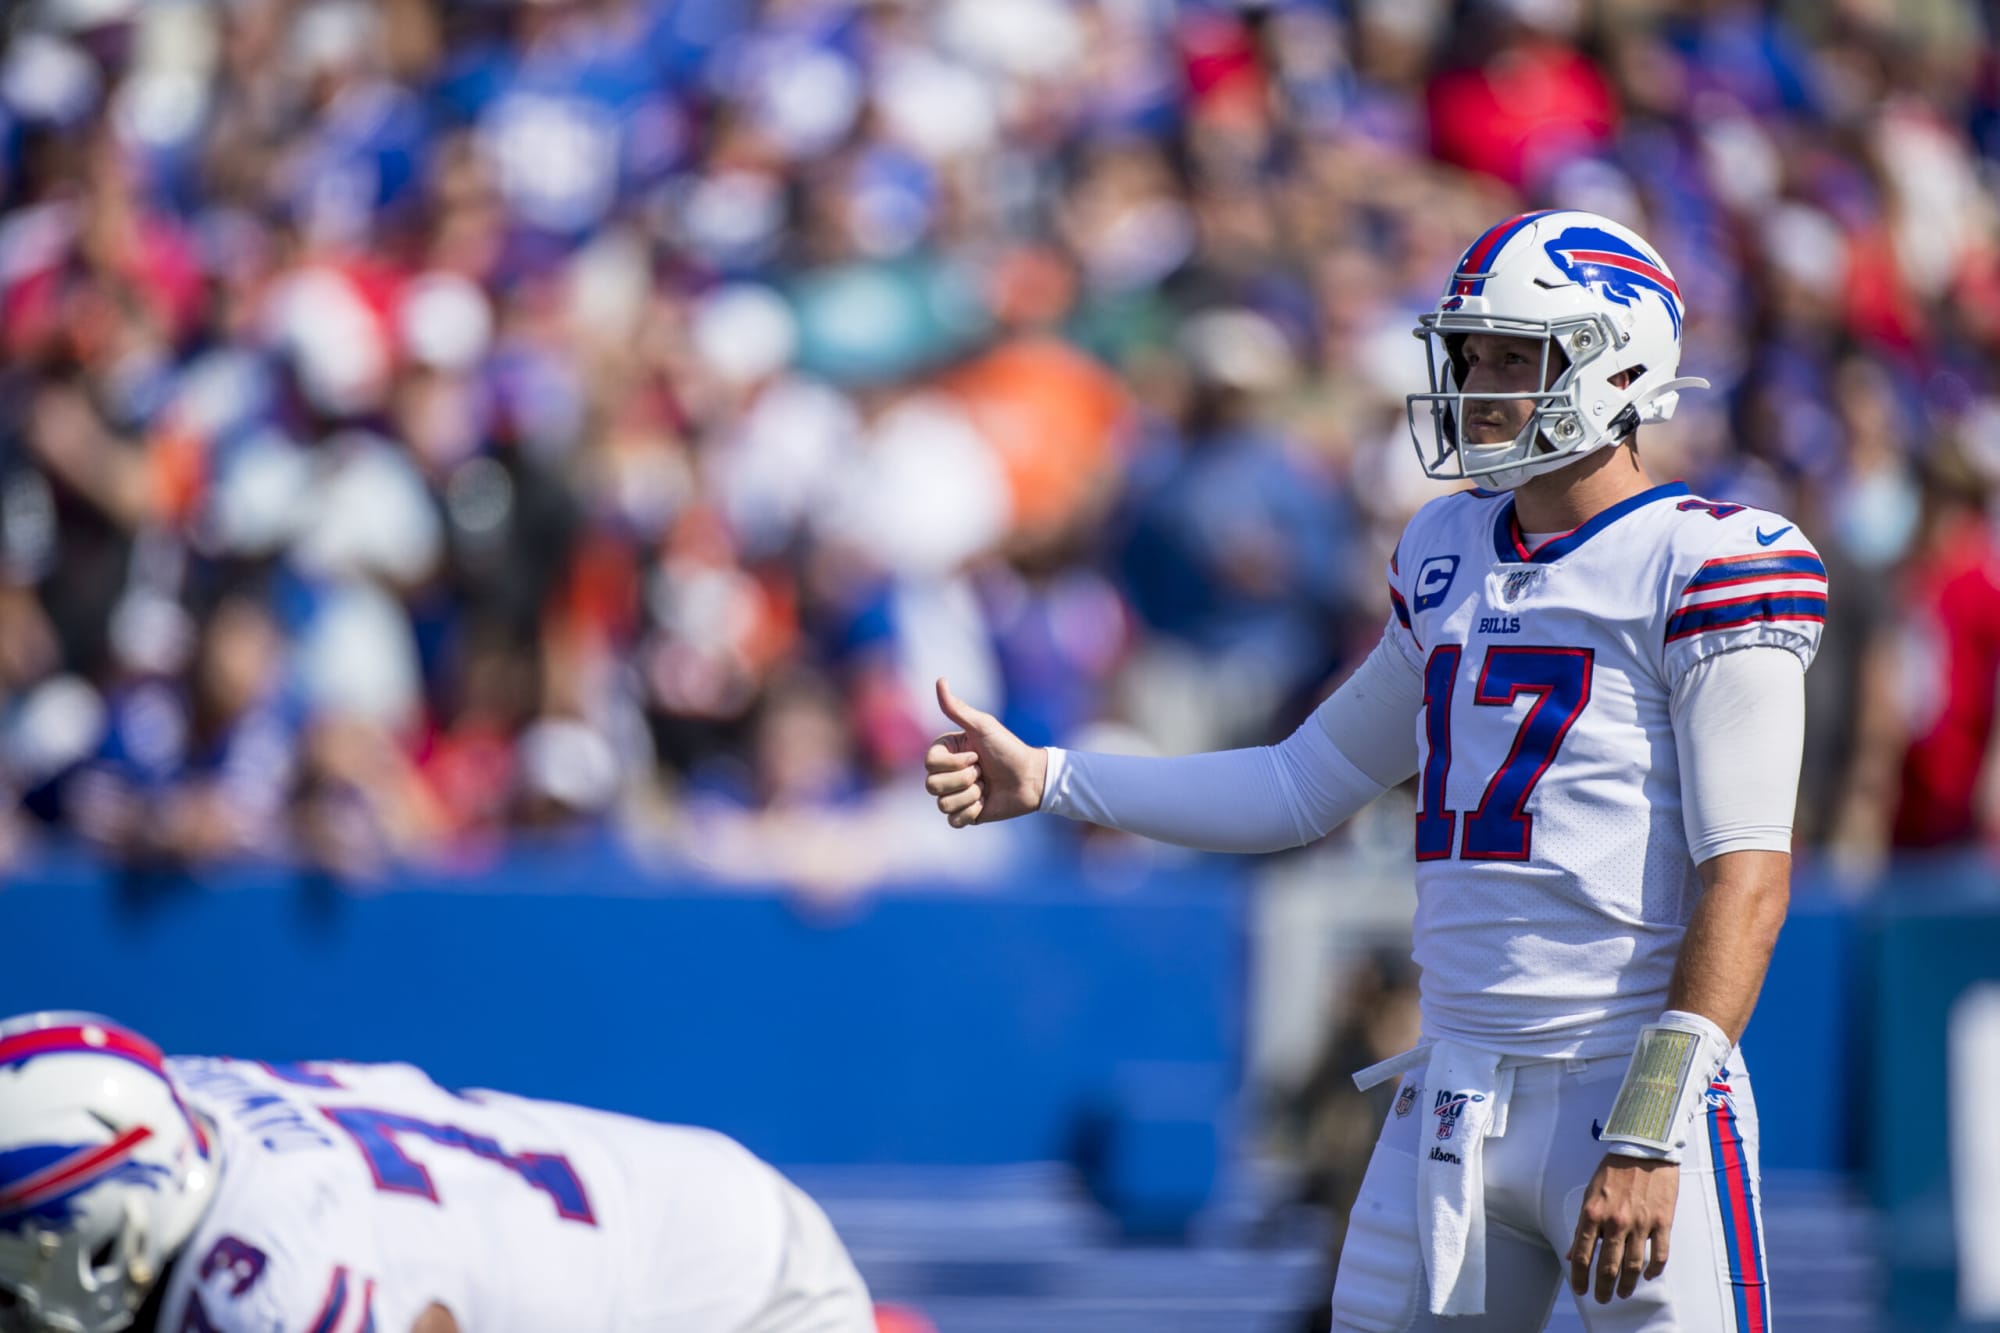 Bills’ notable OTA absence is a low-key advantage for Super Bowl hopes